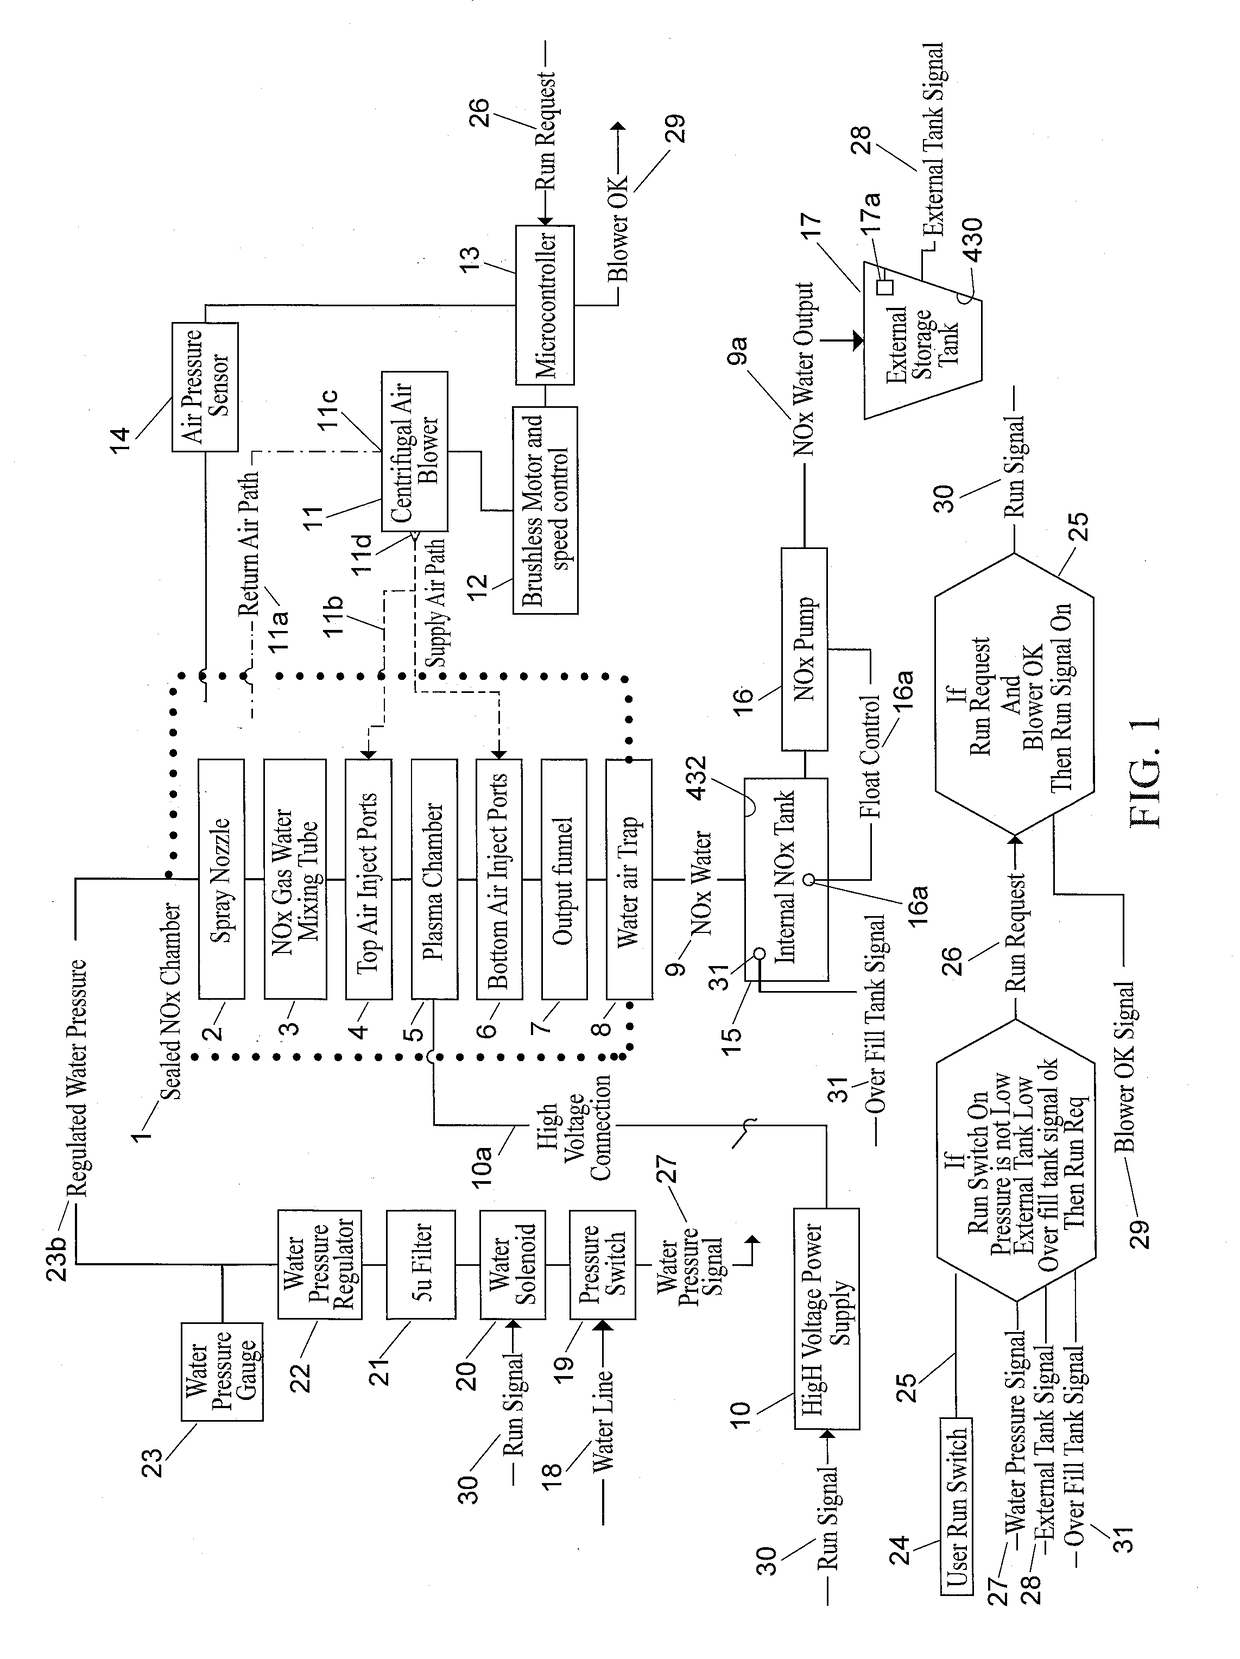 Method and apparatus to infuse water with nitrate (NO3) and nitrite (NO2) using electrical plasma for use in plant fertilization